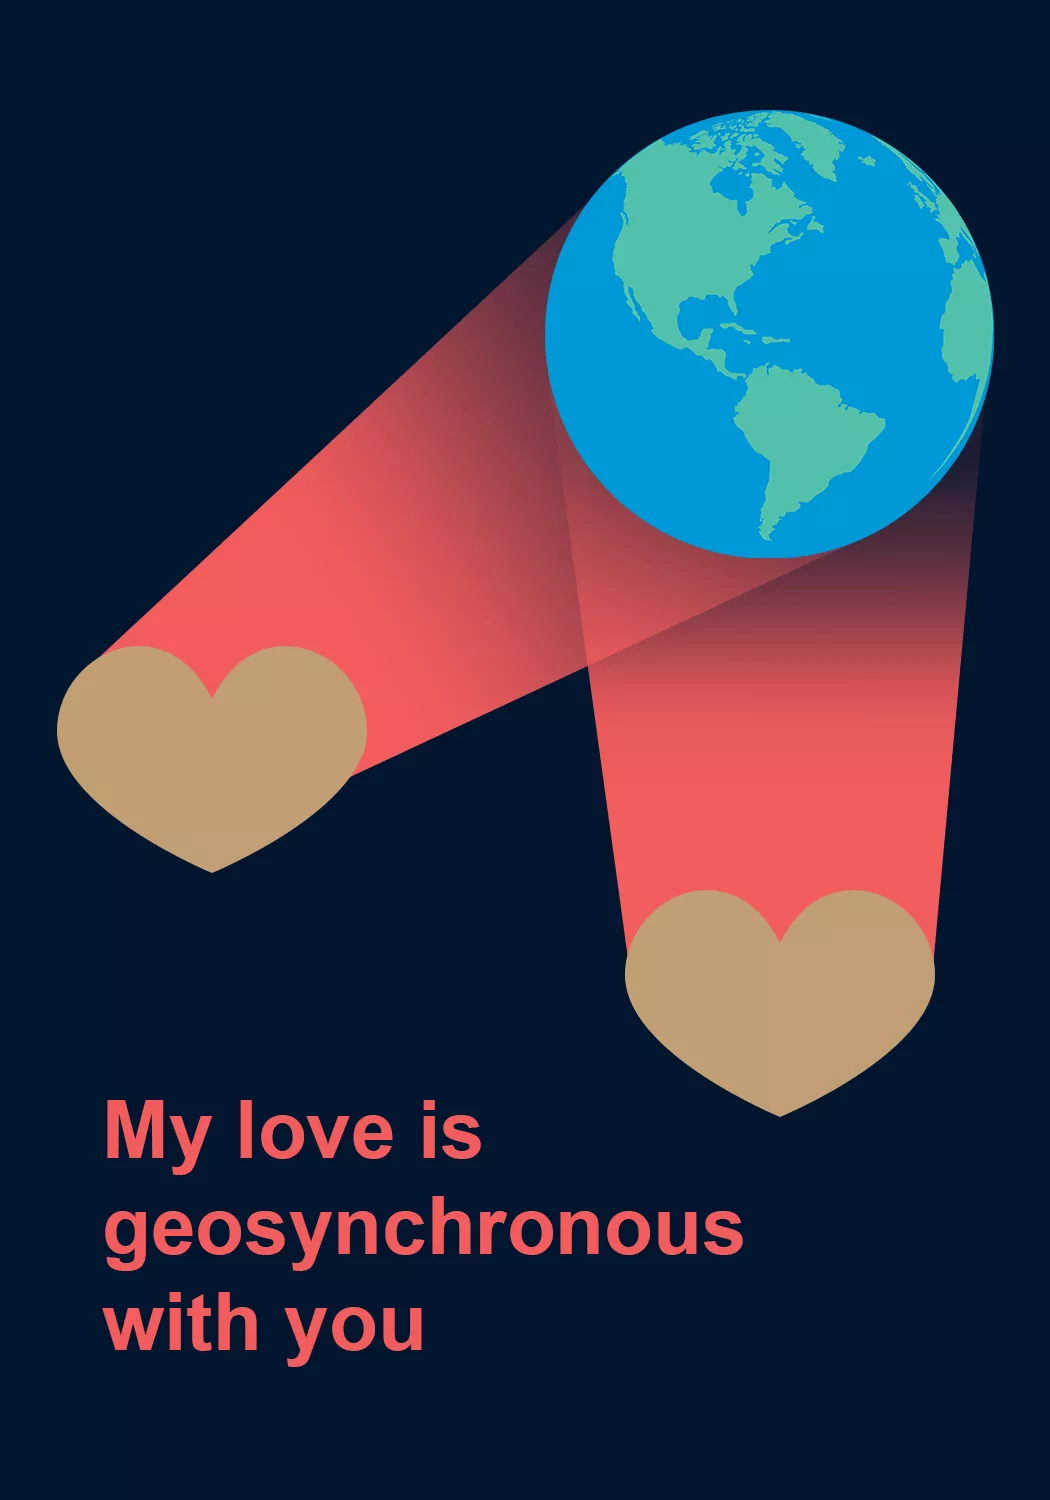 Image of the earth and hearts